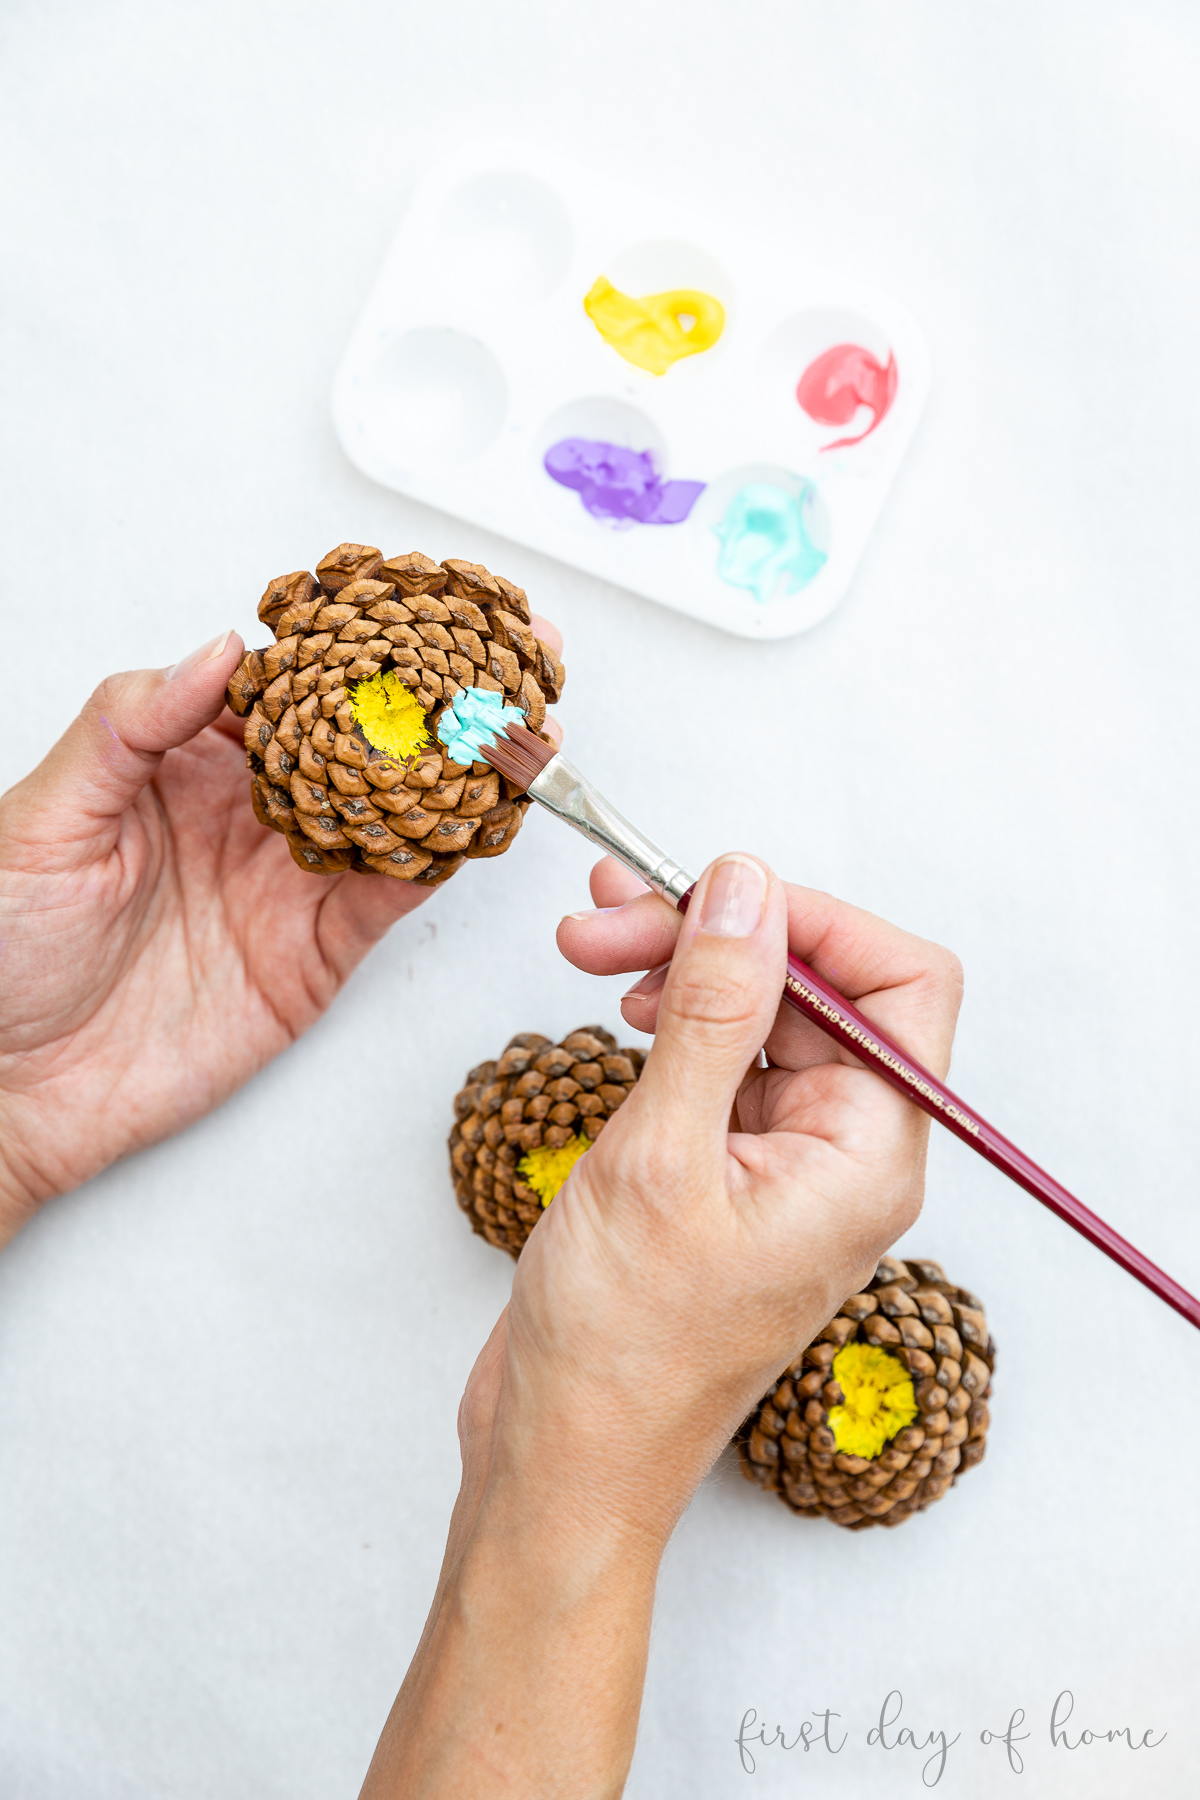 Painting the scales of a pinecone to look like flowers